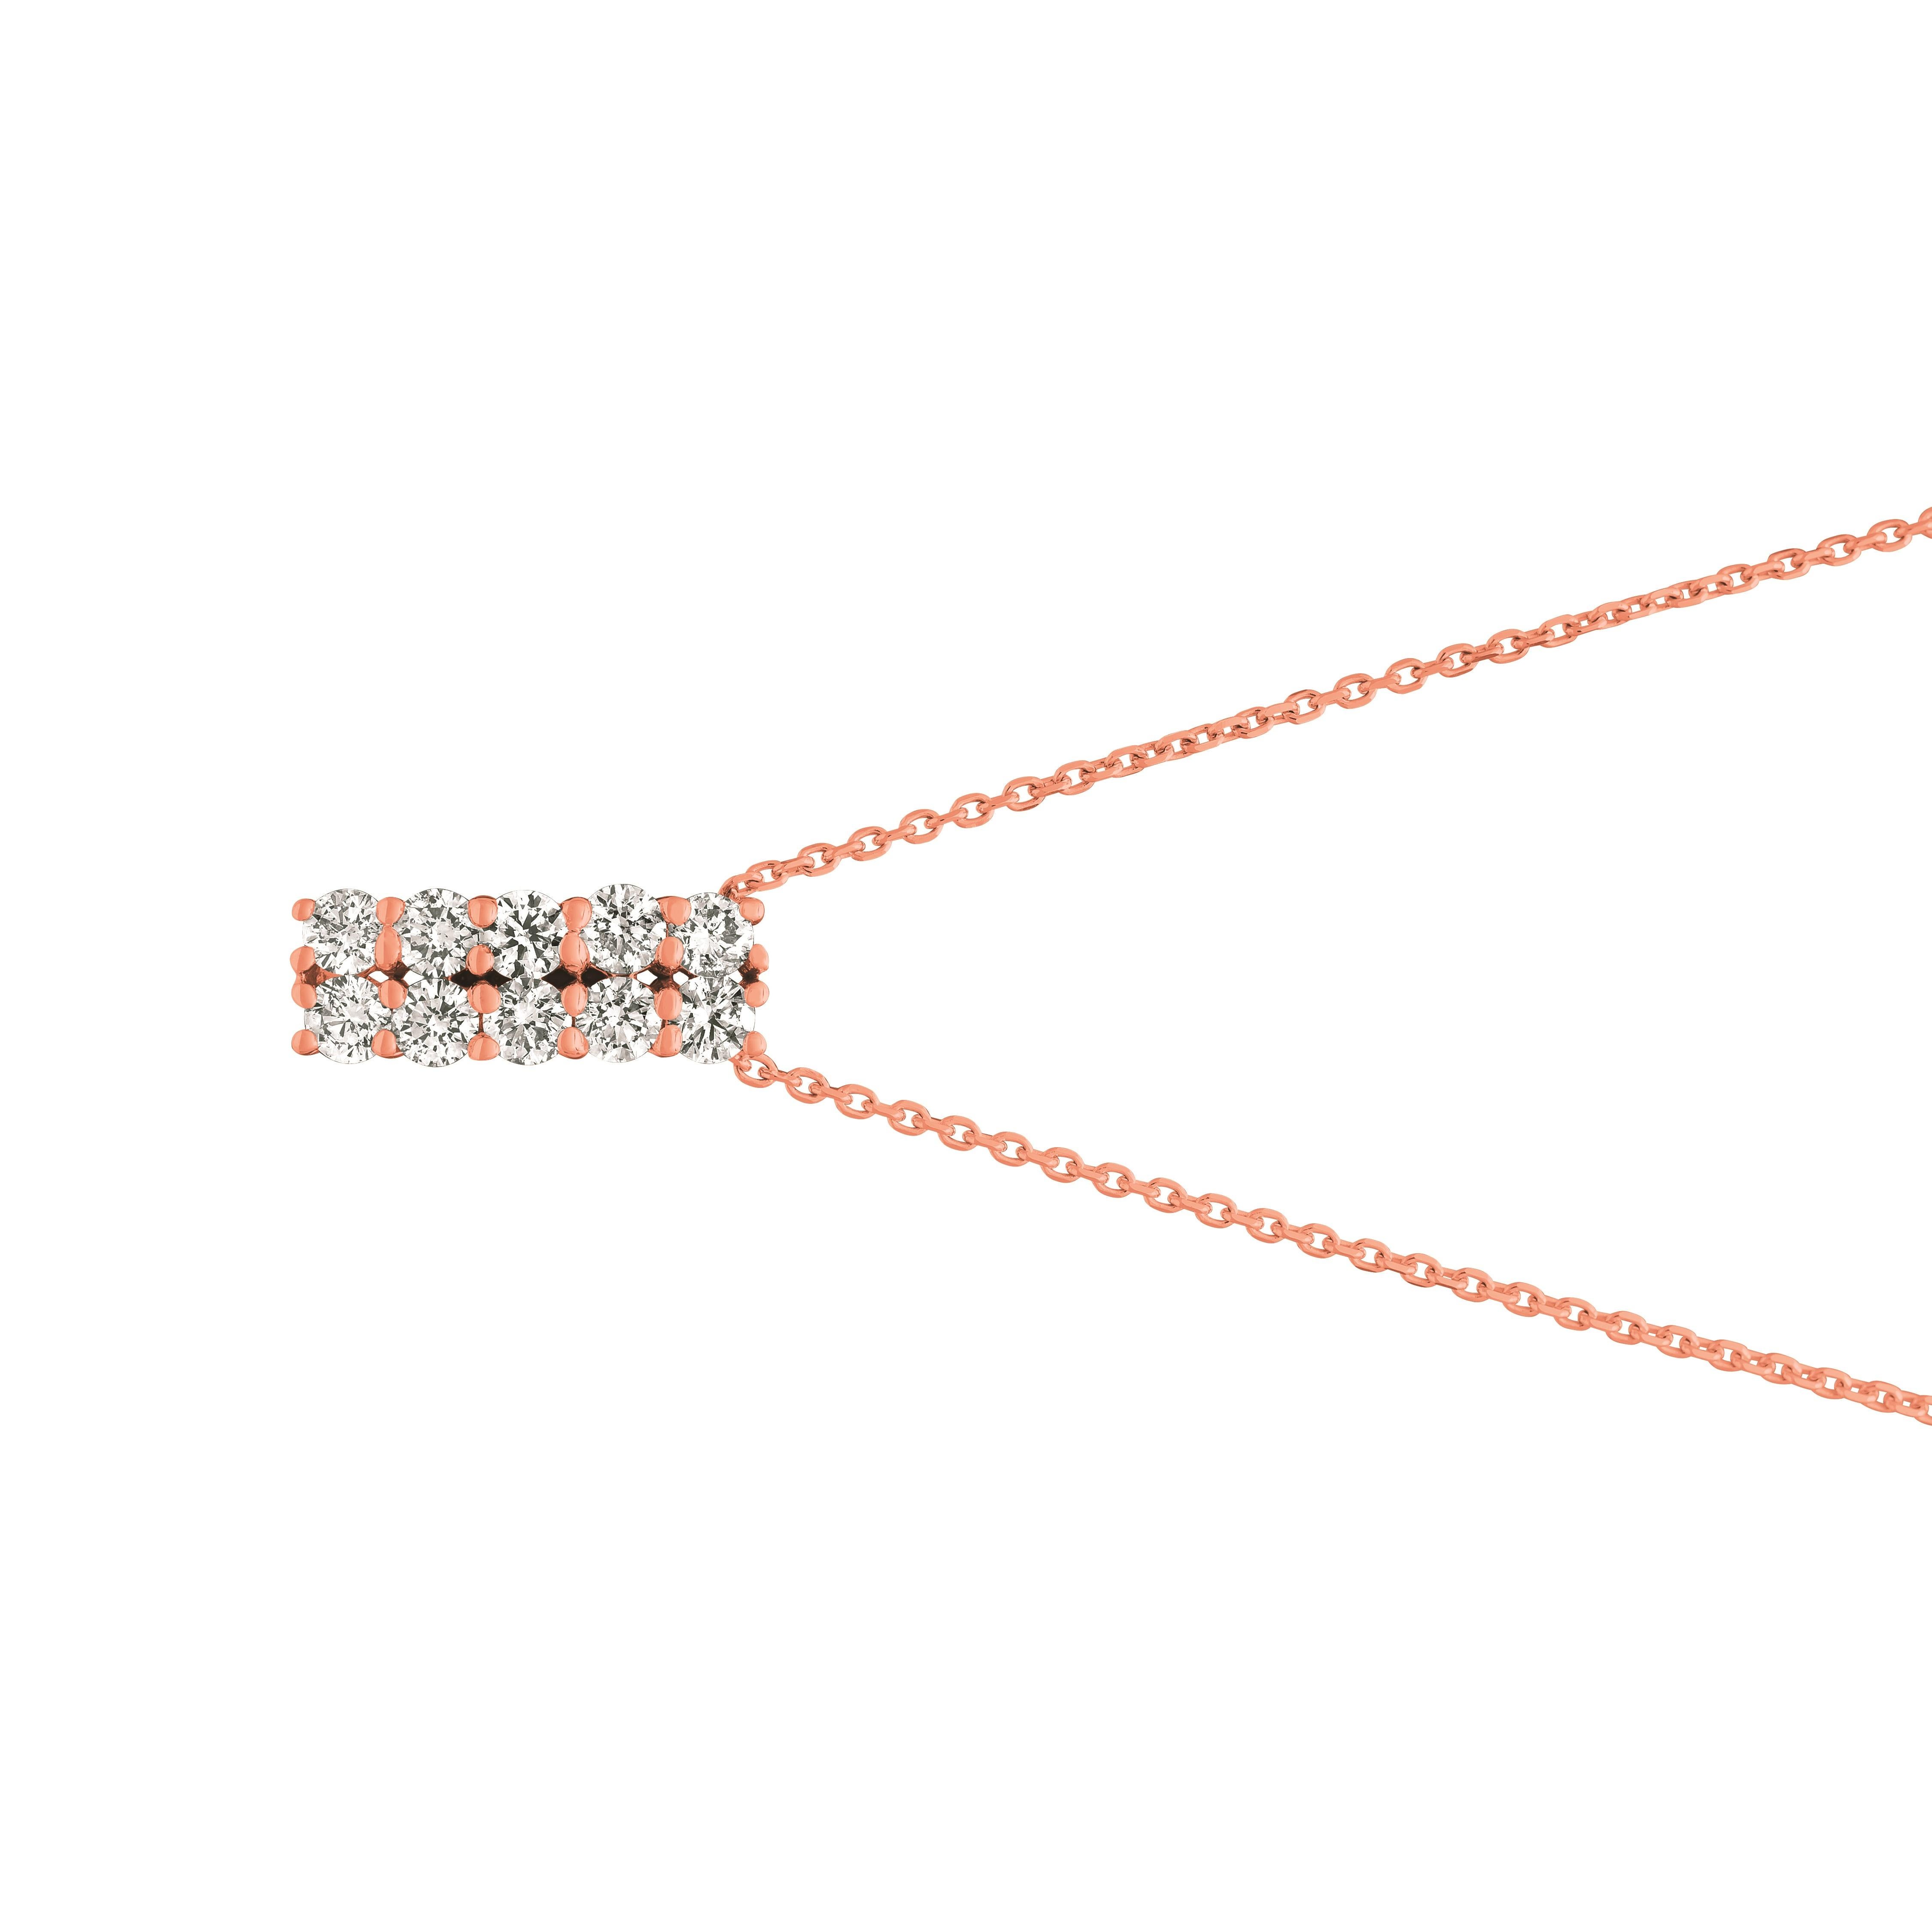 1.01 Carat Natural Diamond 2 Rows Necklace 14K Rose Gold G SI 18 inches chain

100% Natural Diamonds, Not Enhanced in any way Round Cut Diamond Necklace
1.01CT
G-H
SI
14K Rose Gold, Prong style , 3.2 grams
5/8 inch in height, 3/16 inch in width
10